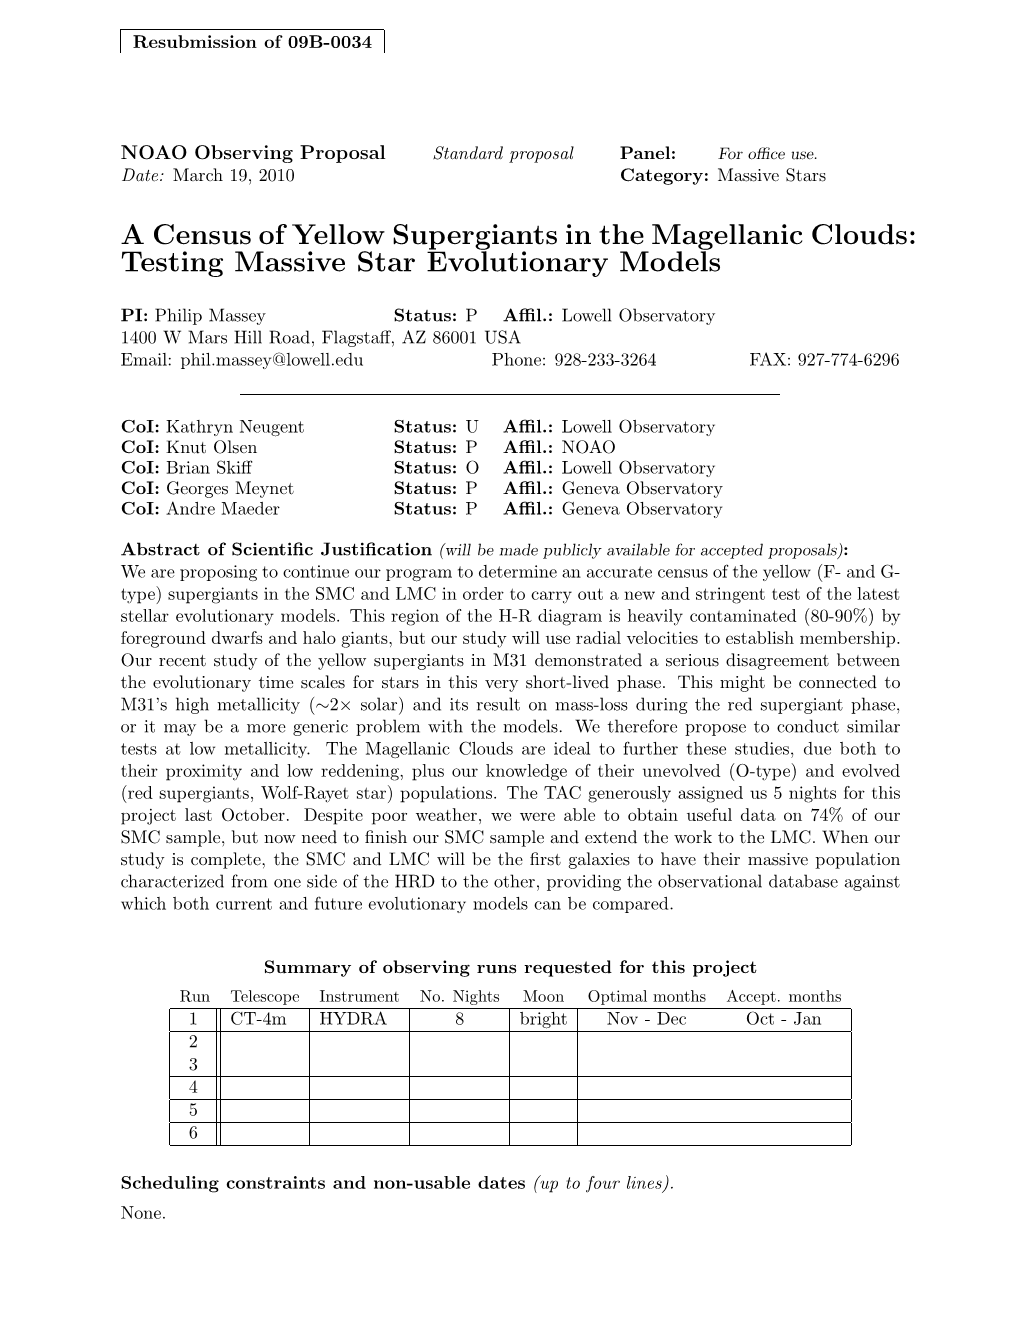 A Census of Yellow Supergiants in the Magellanic Clouds: Testing Massive Star Evolutionary Models